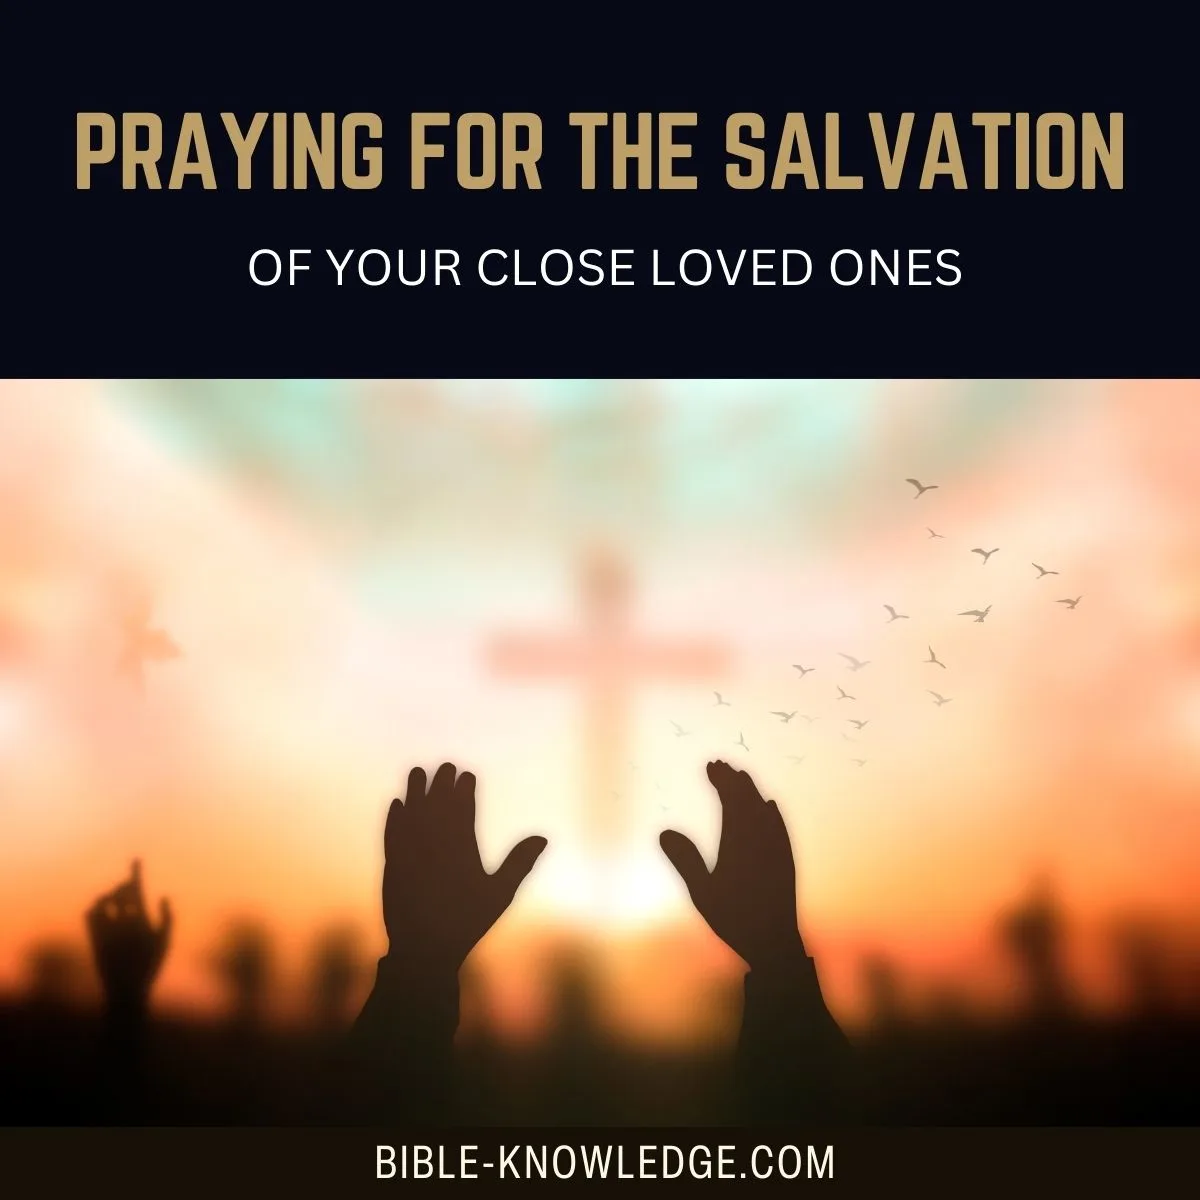 Praying For the Salvation of Your Close Loved Ones